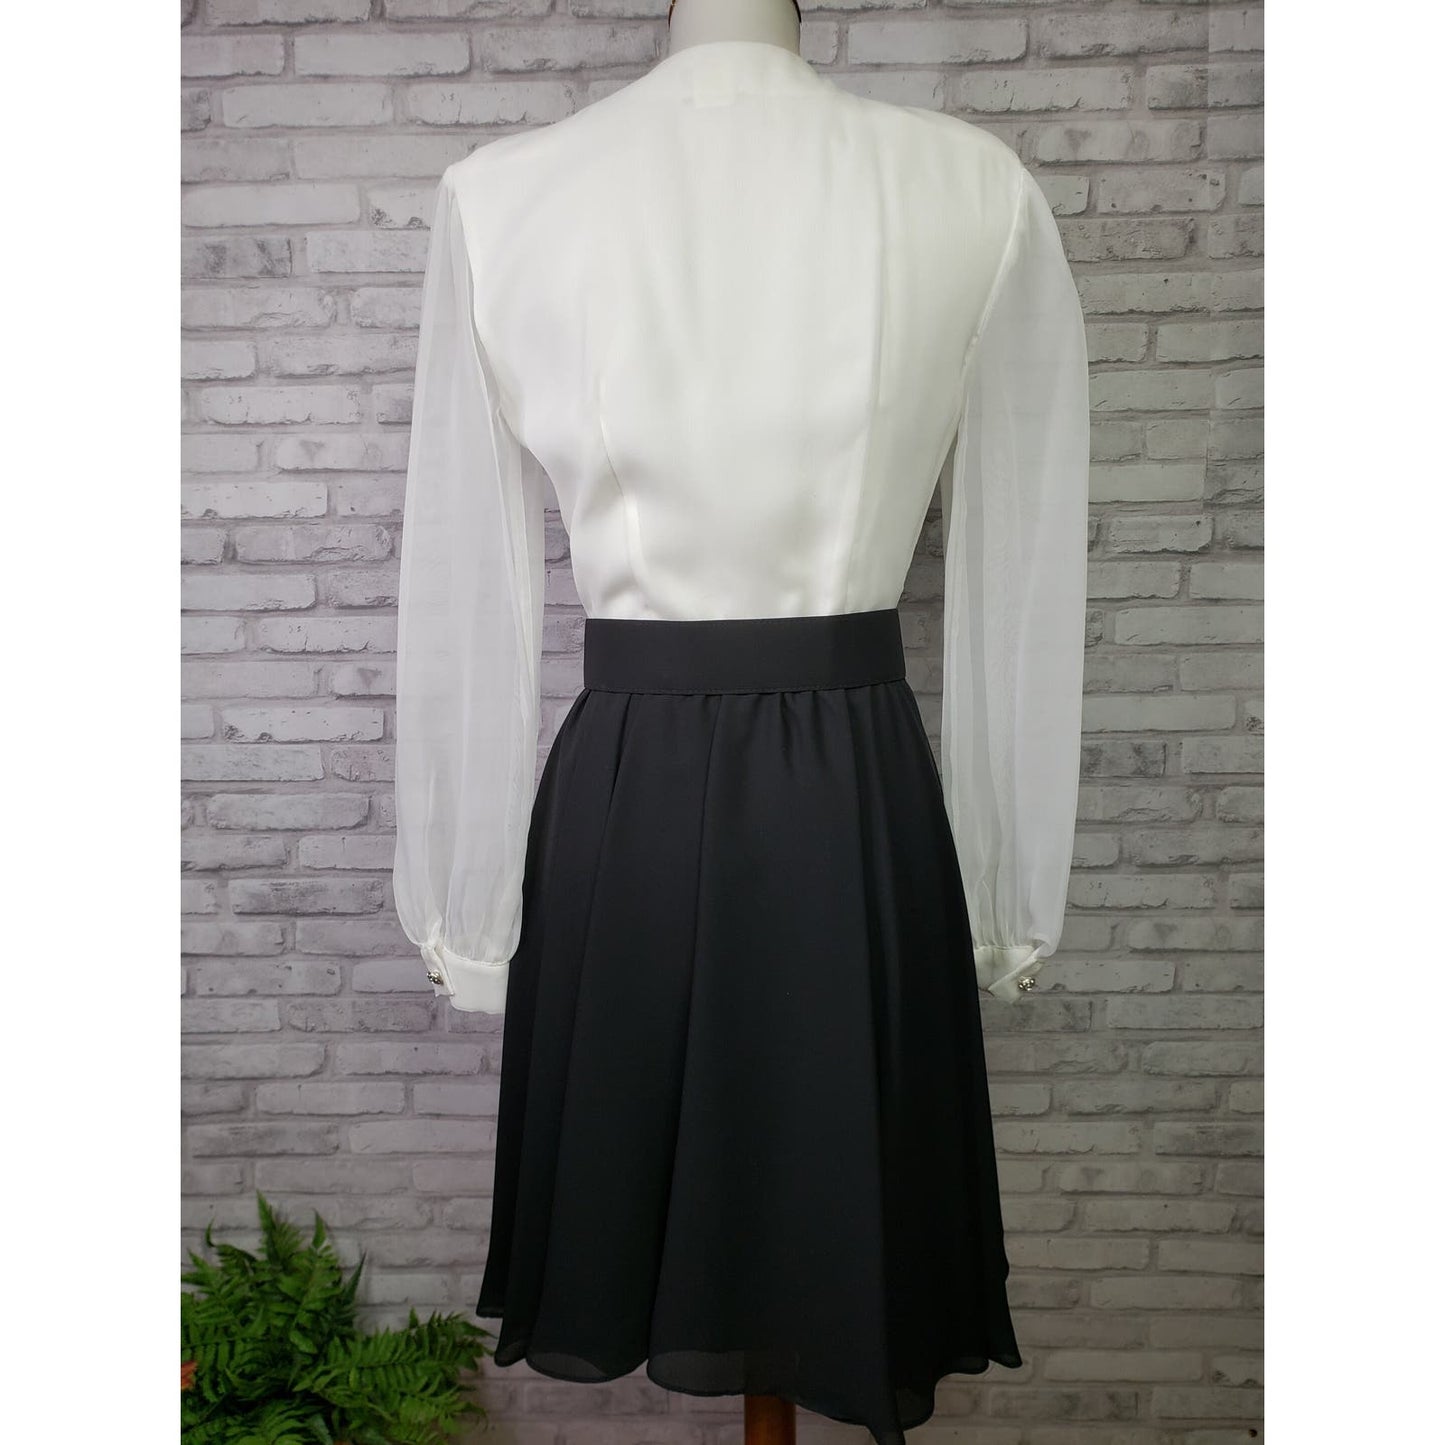 Vintage 1980s cocktail dress white and black wrap-look mini, Positively Ellyn size 4 women's vintage 34-inch bust